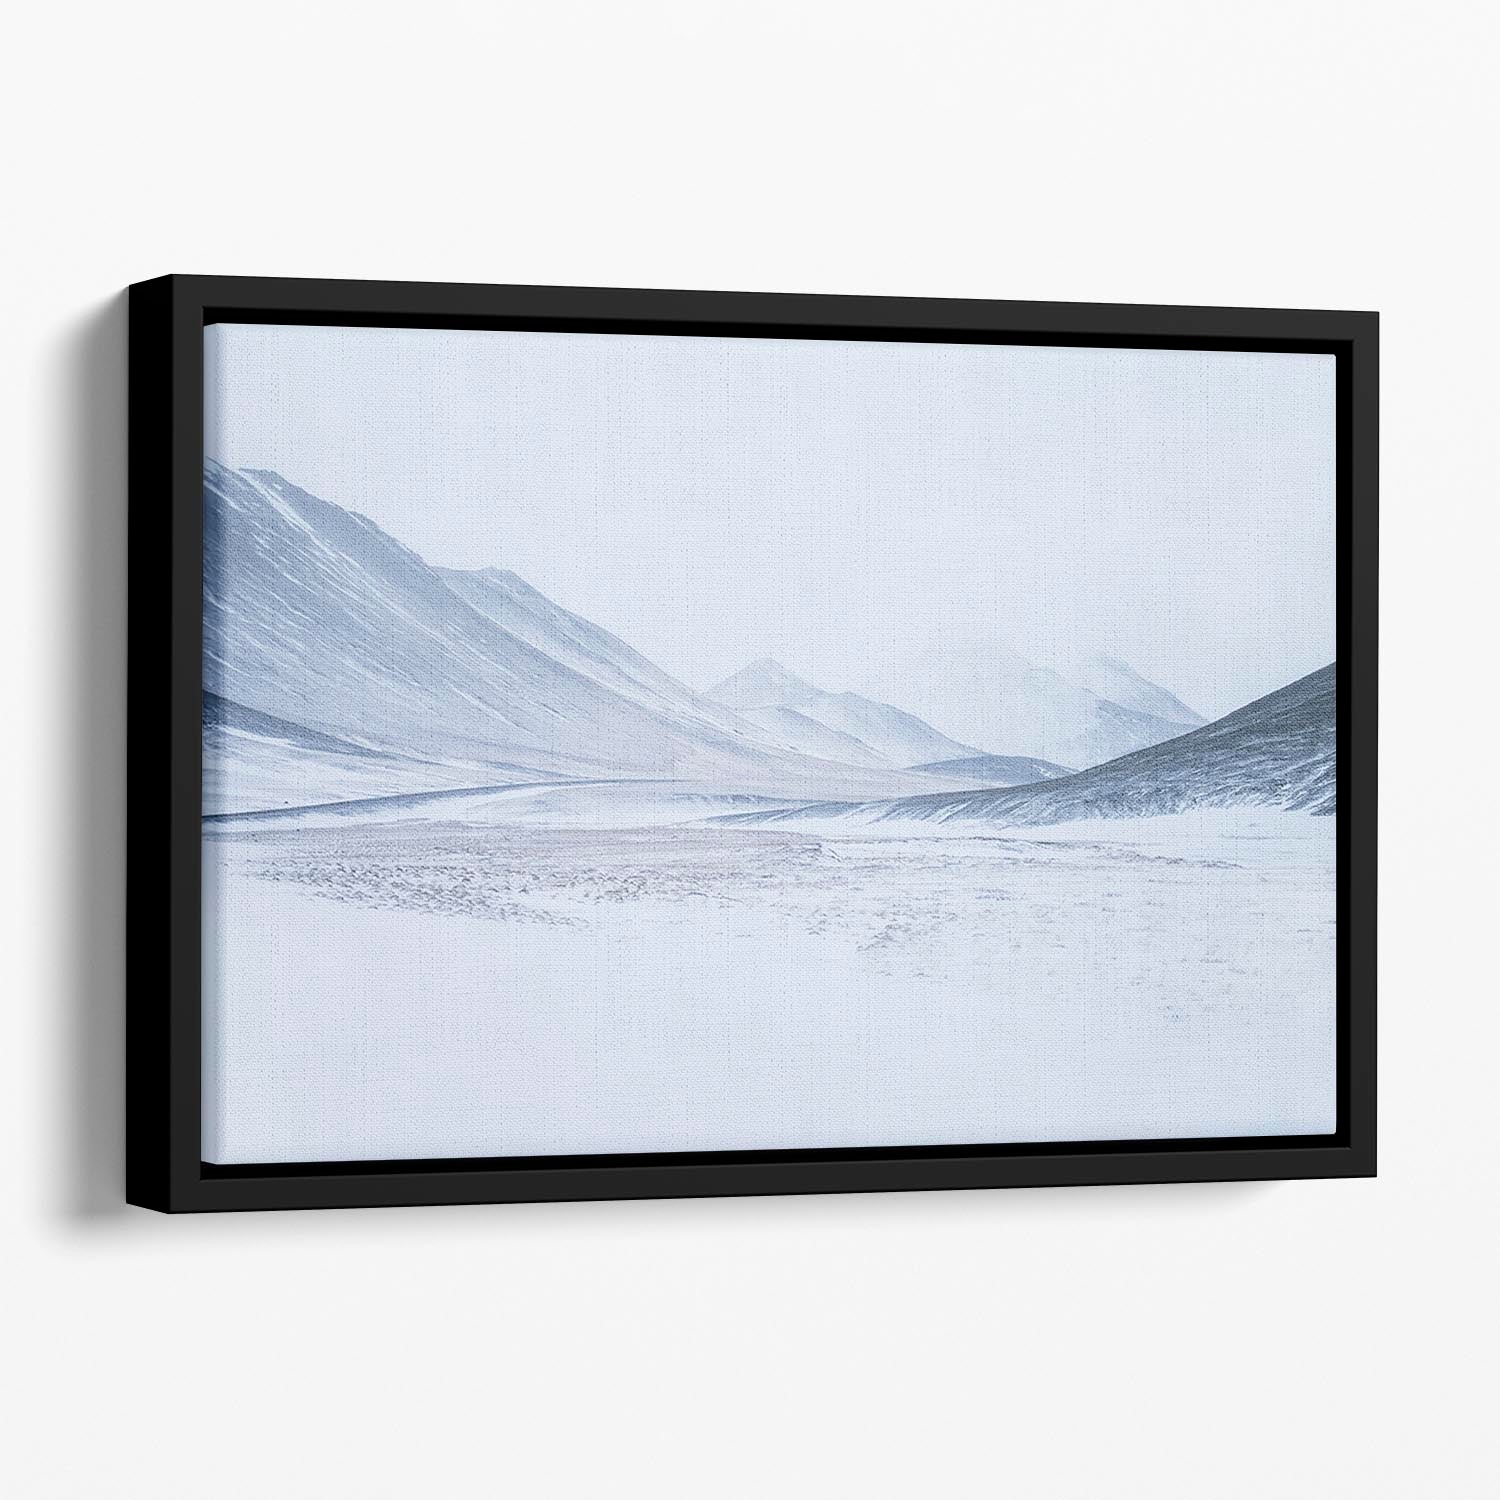 1 Sketched By The Wind Drawn Mountains Floating Framed Canvas - Canvas Art Rocks - 1